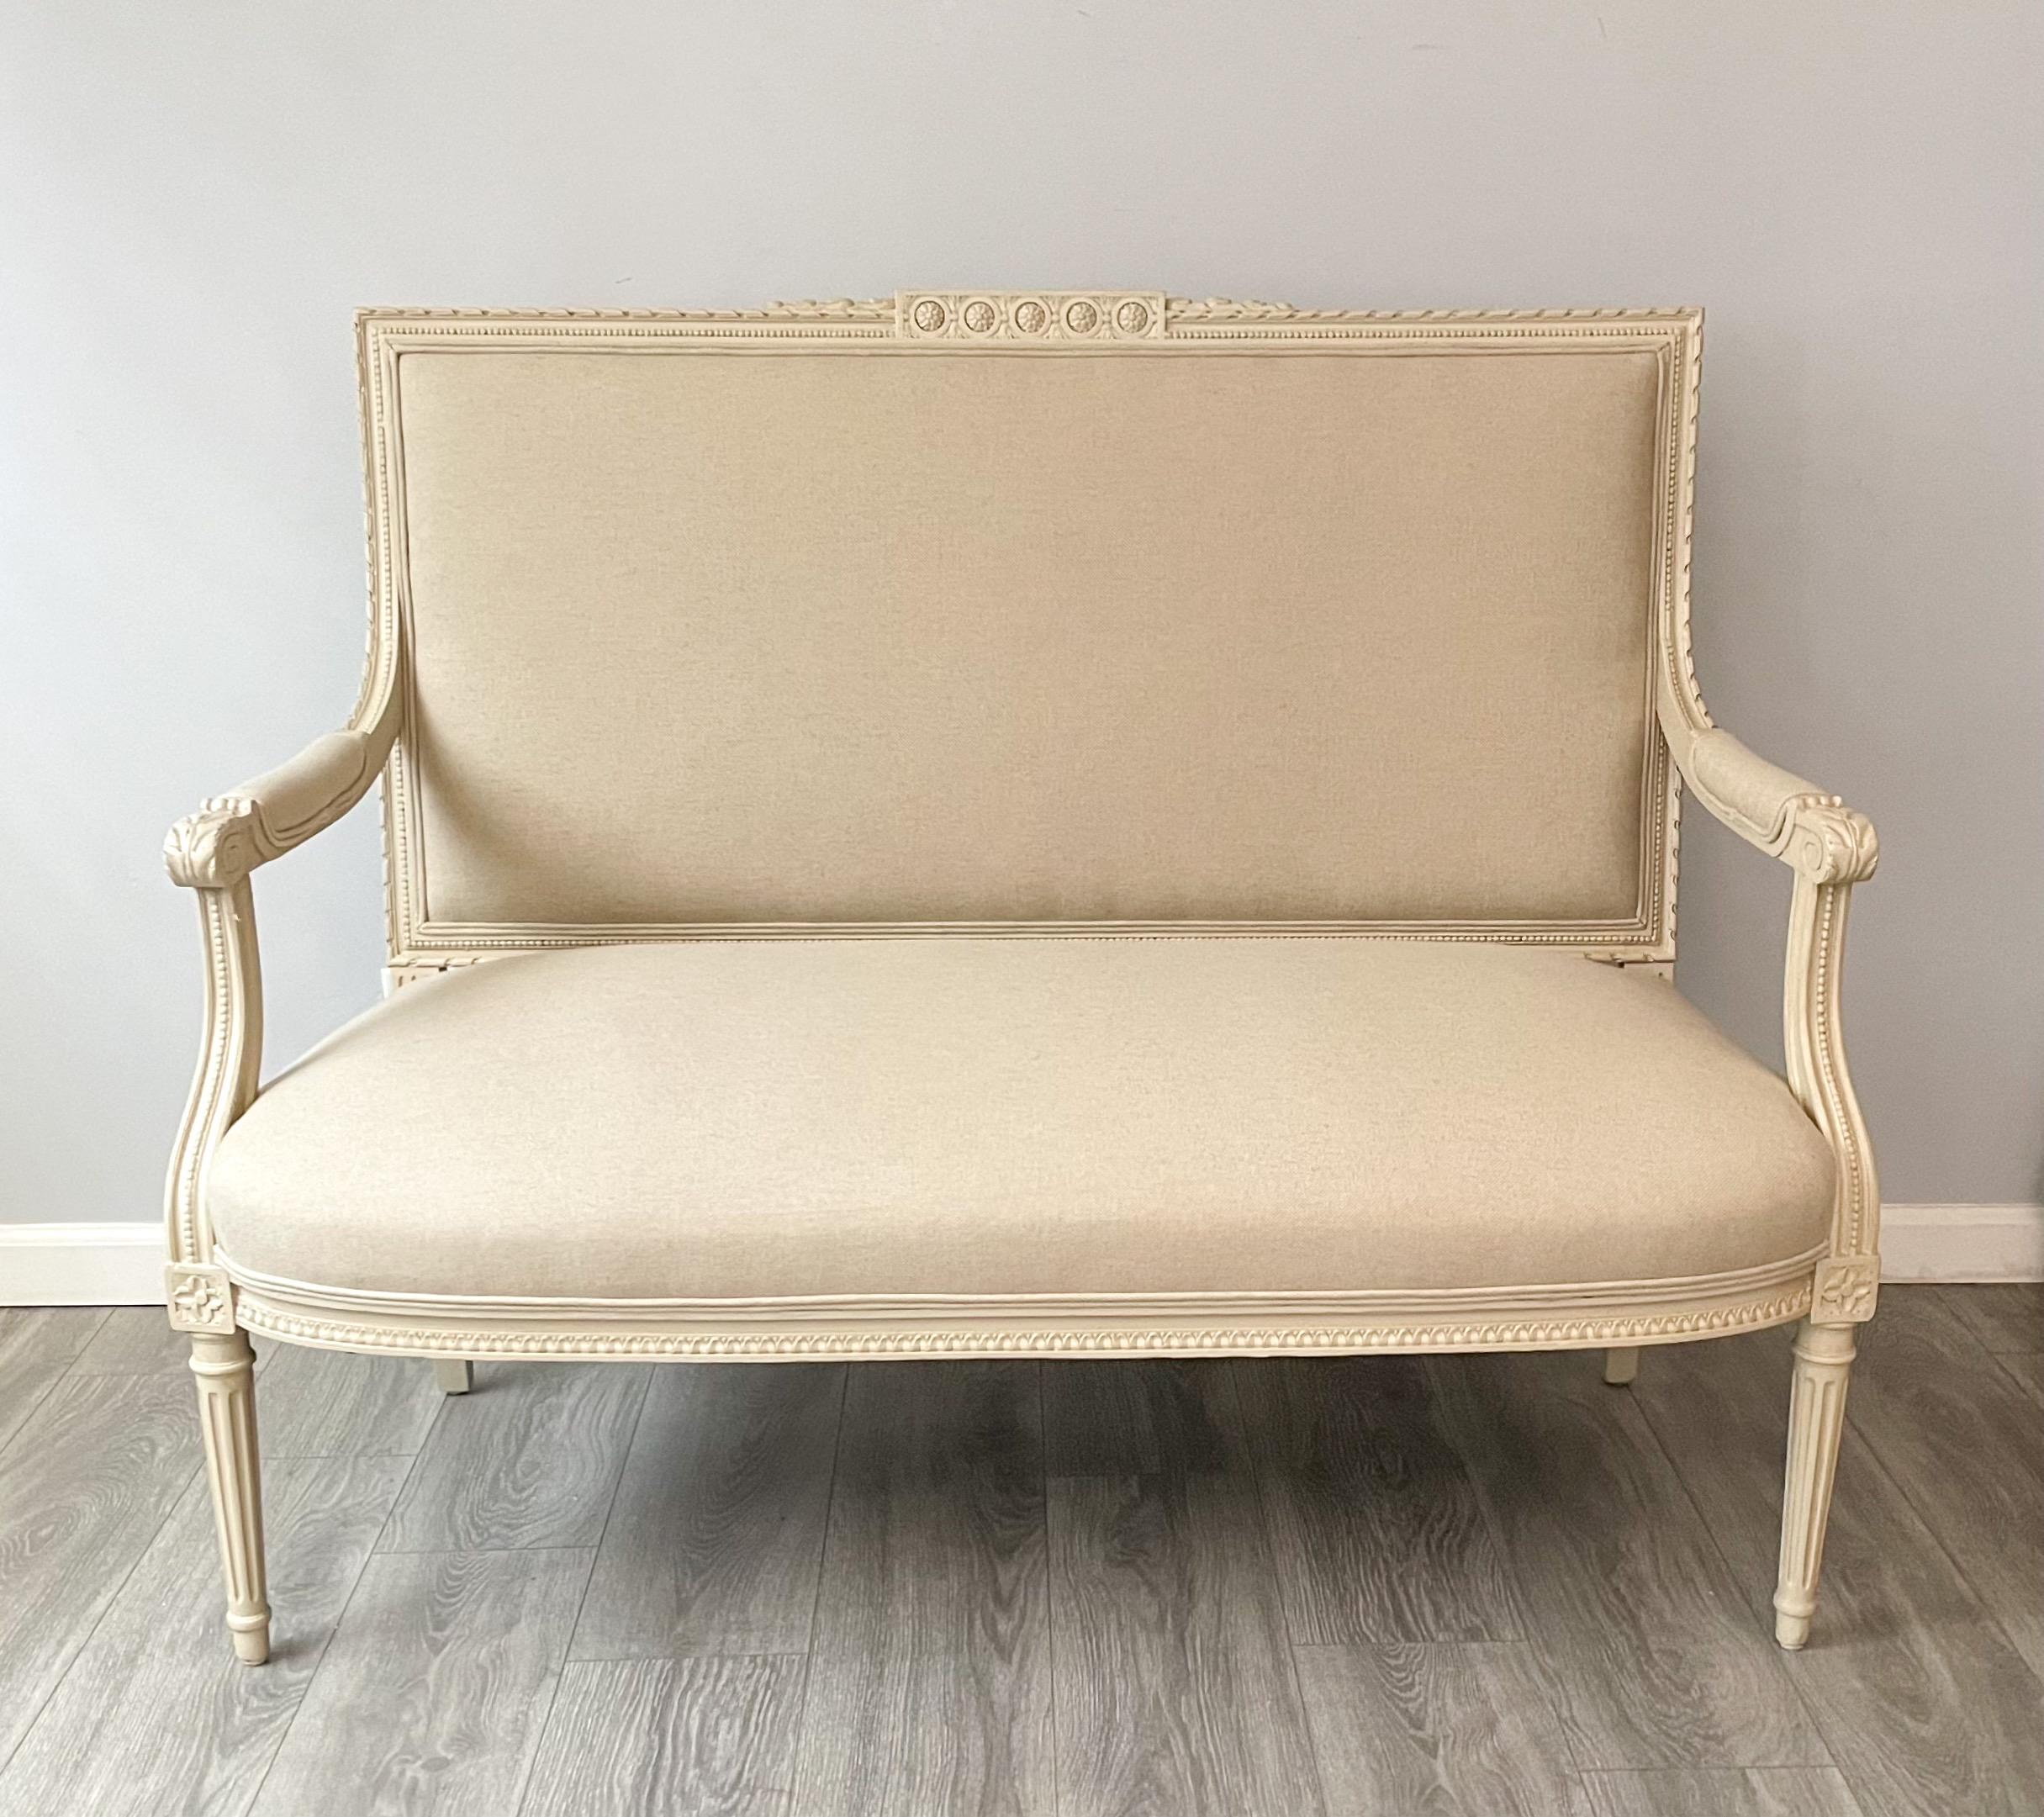 Beautiful, French 1920s settee in the Louis XVI style.

The settee features an intricate but tastefully carved wood frame that’s been newly painted in a crème color with a light, hand-rubbed antique glaze finish. 

New Belgian linen